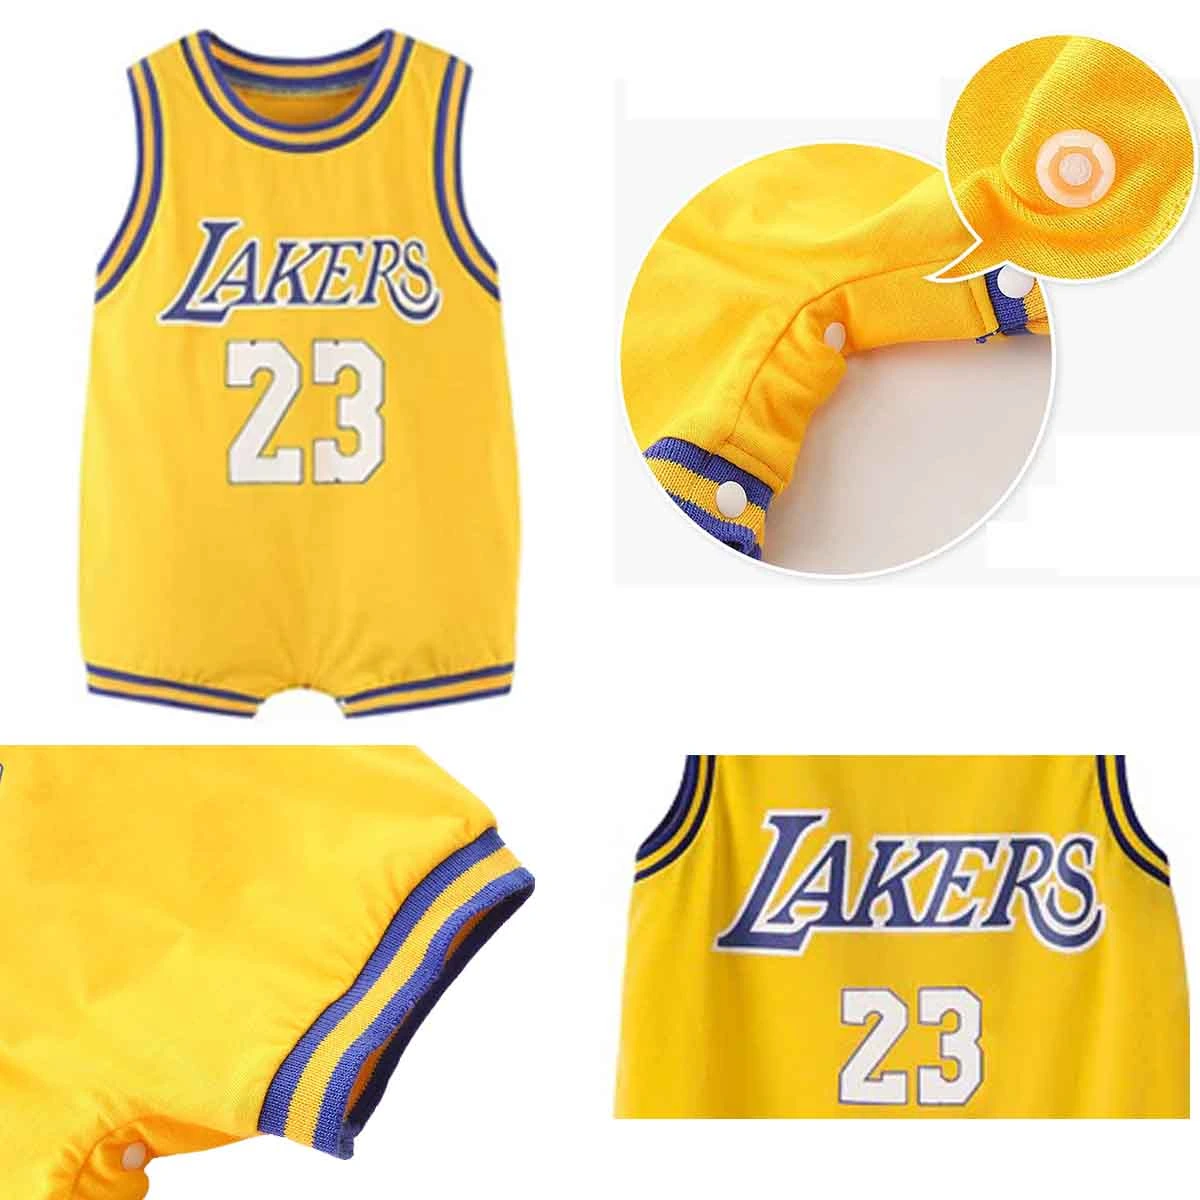 12 month lakers jersey